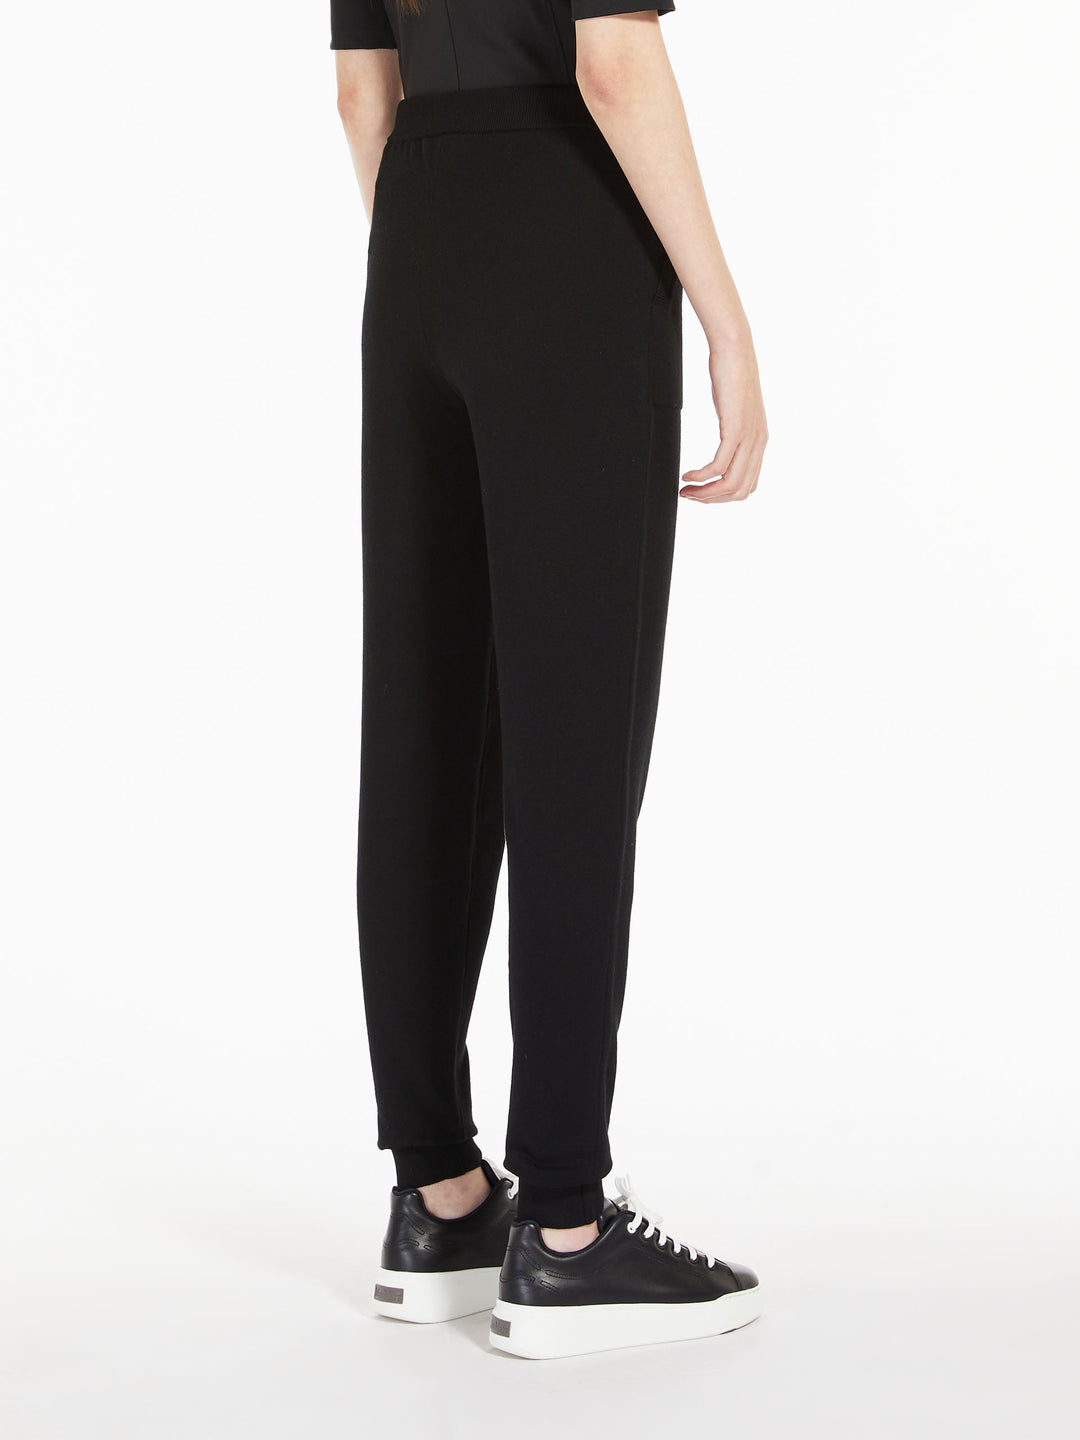 Manager Knit Trousers